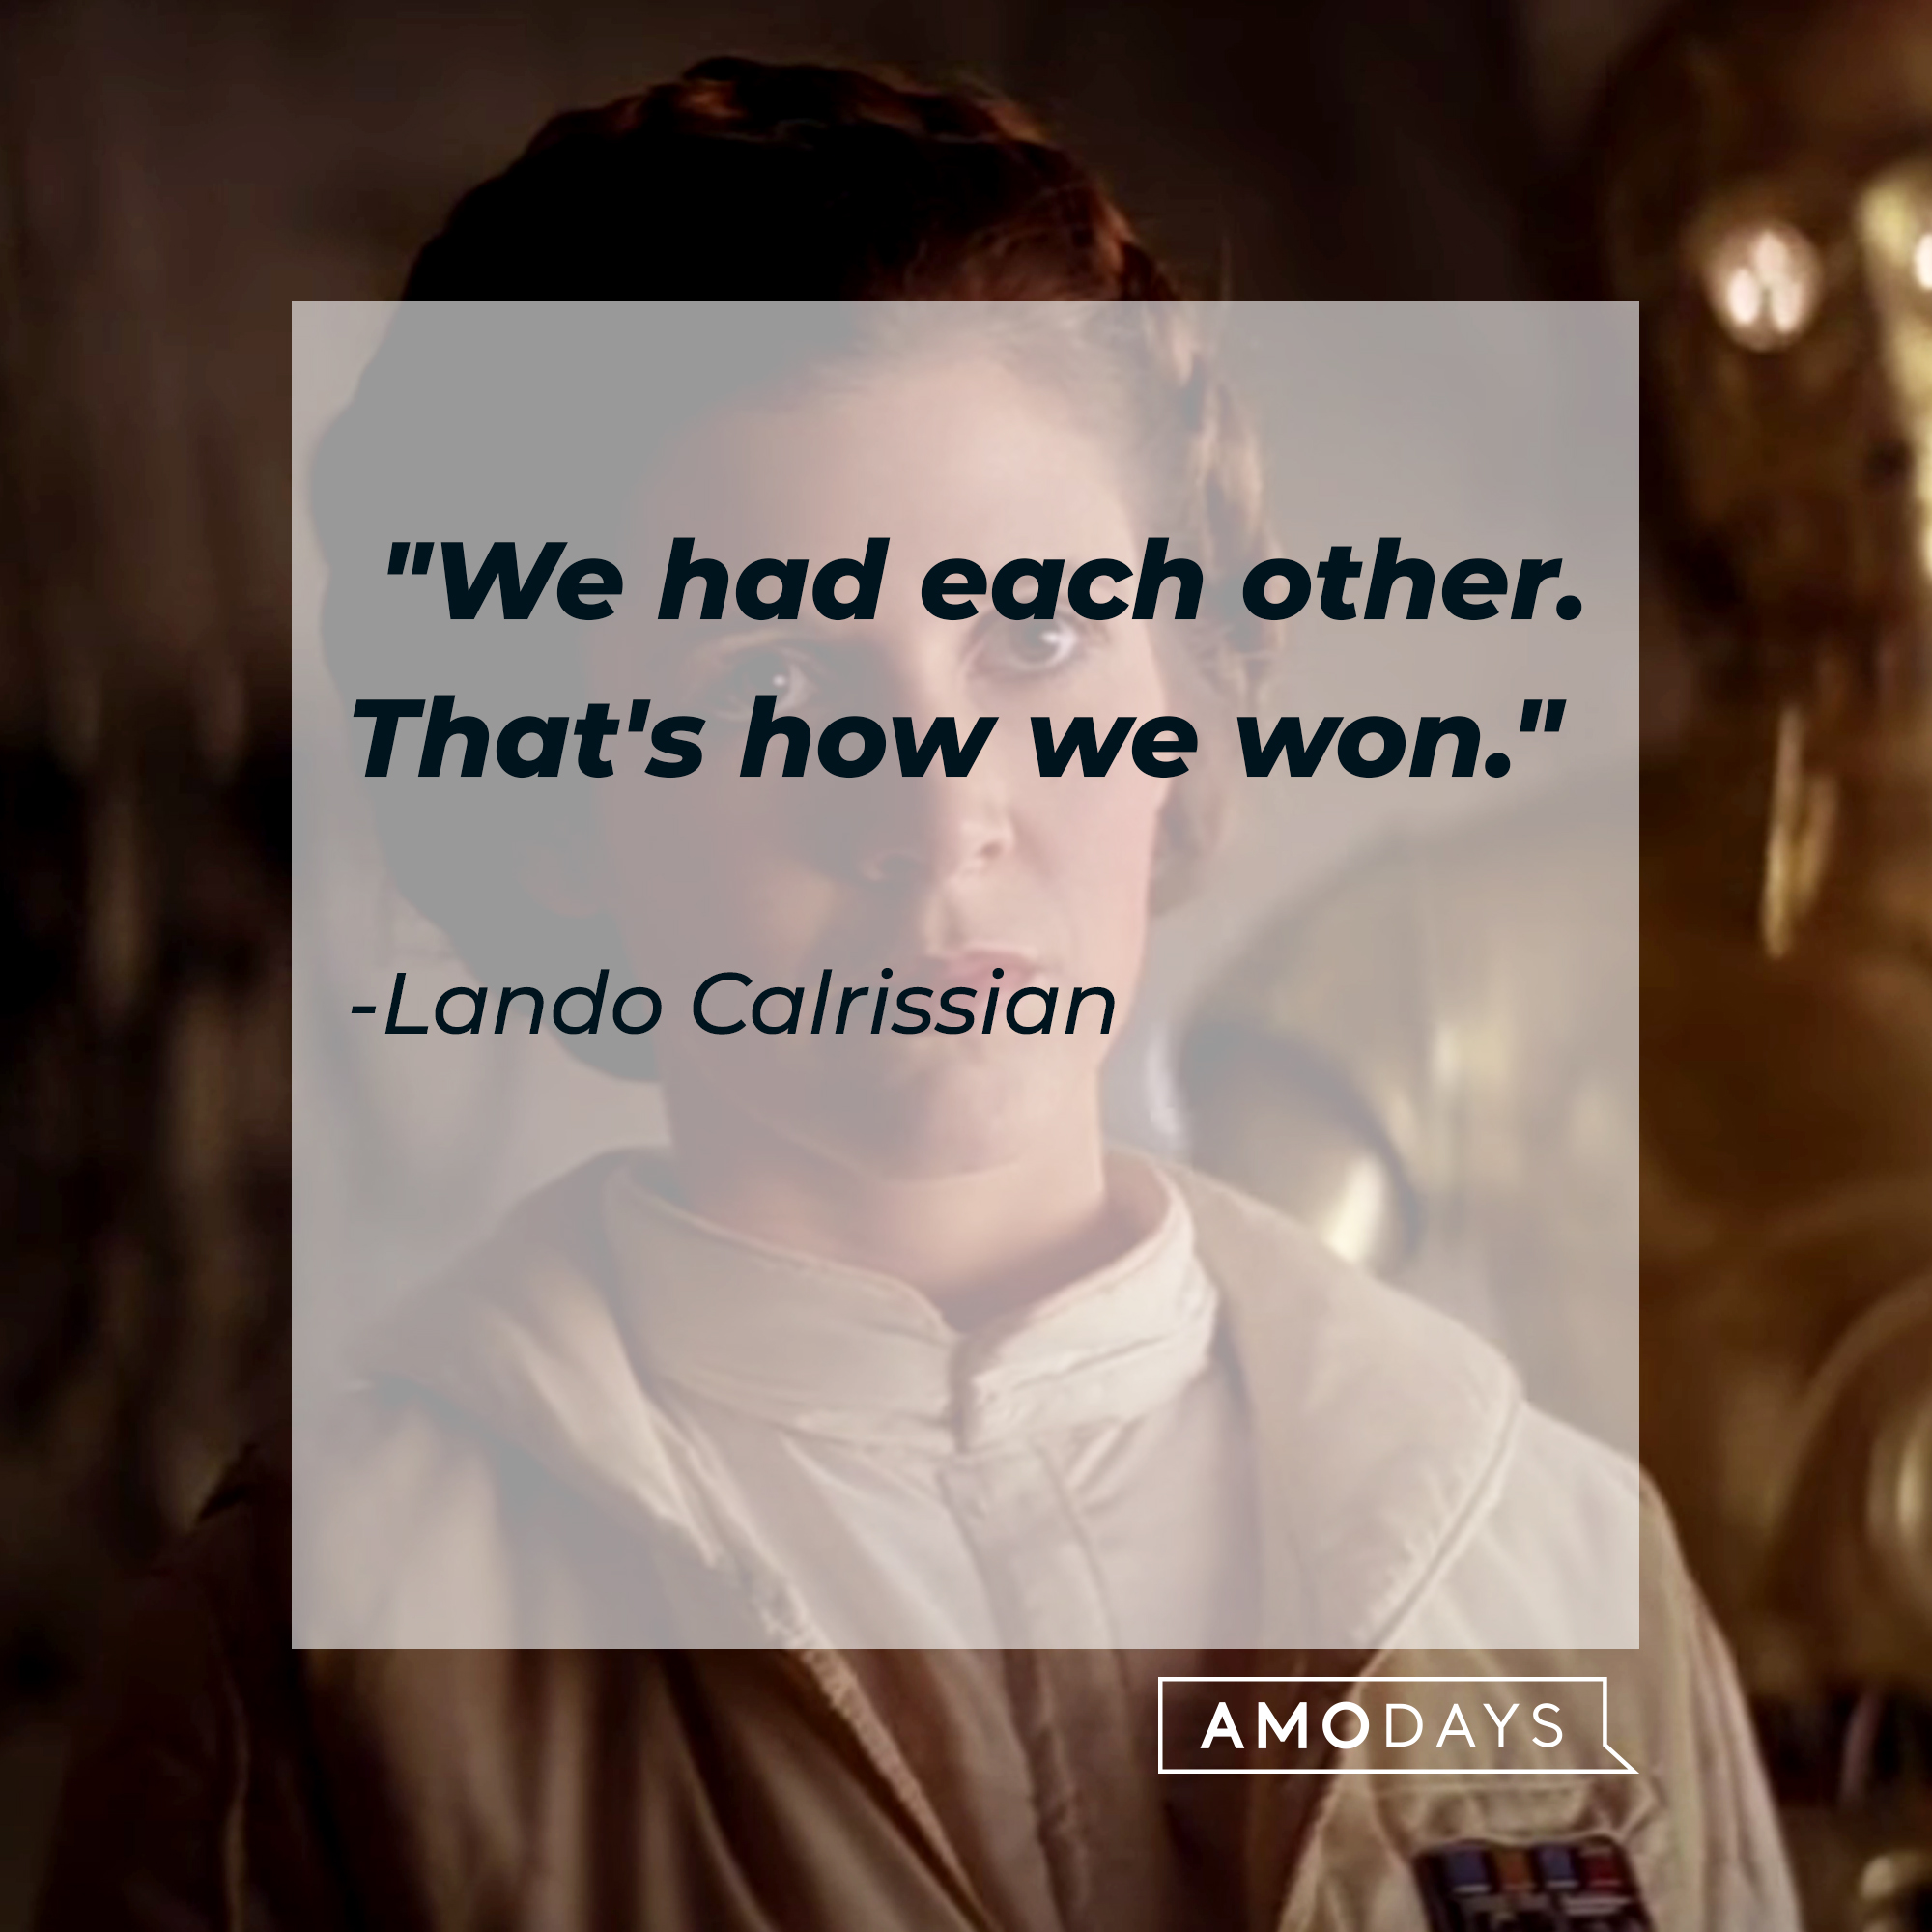 Lando Calrissian's quote, "We had each other. That's how we won." | Source: Facebook/StarWars